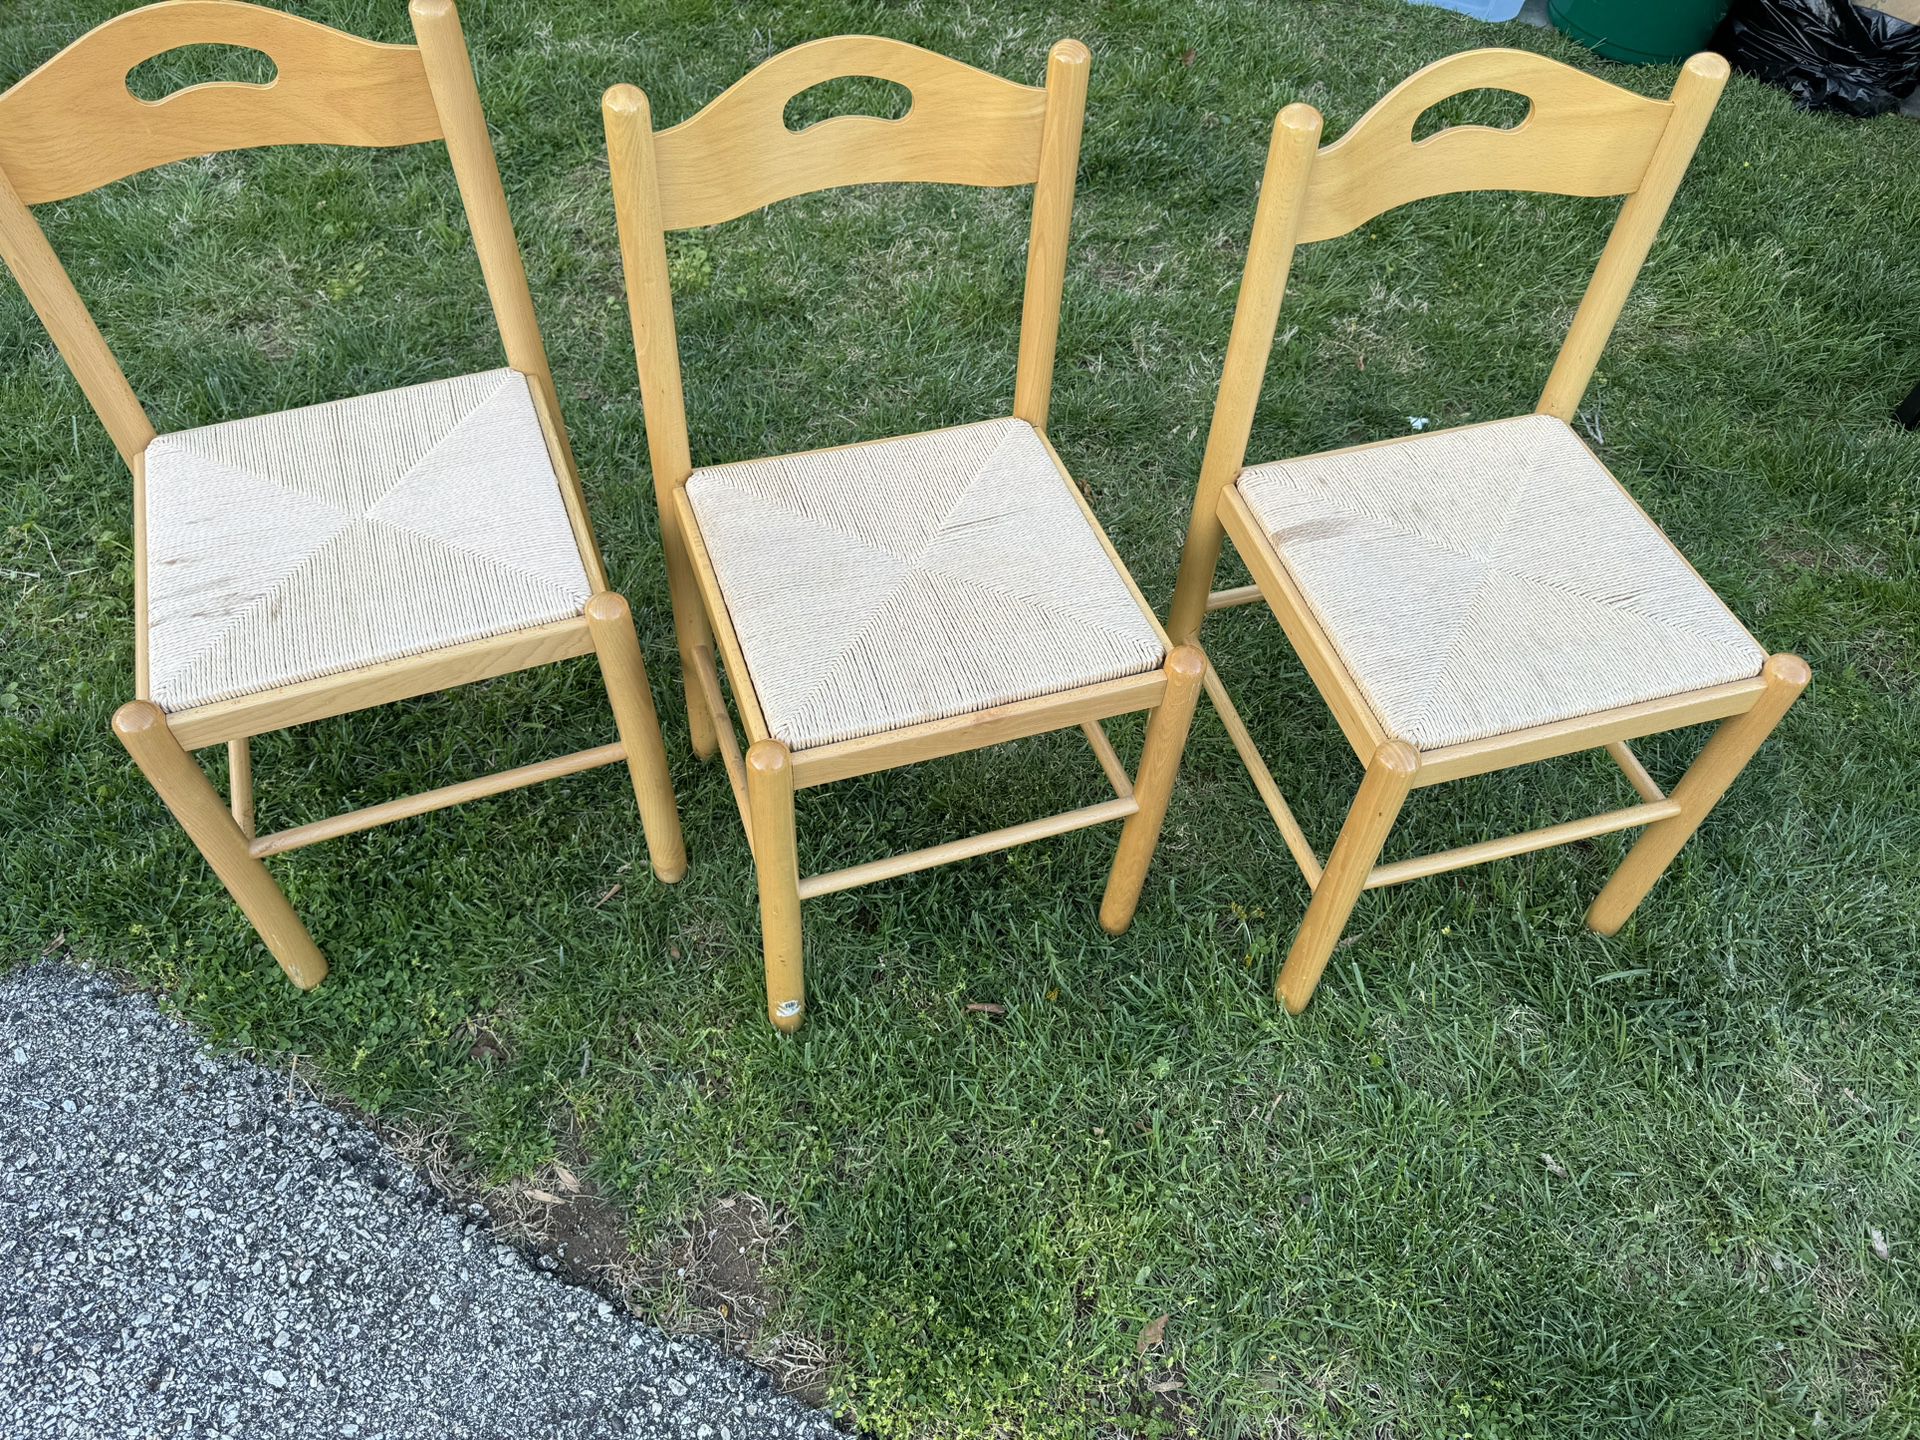 3 Wooden Wicker Chairs